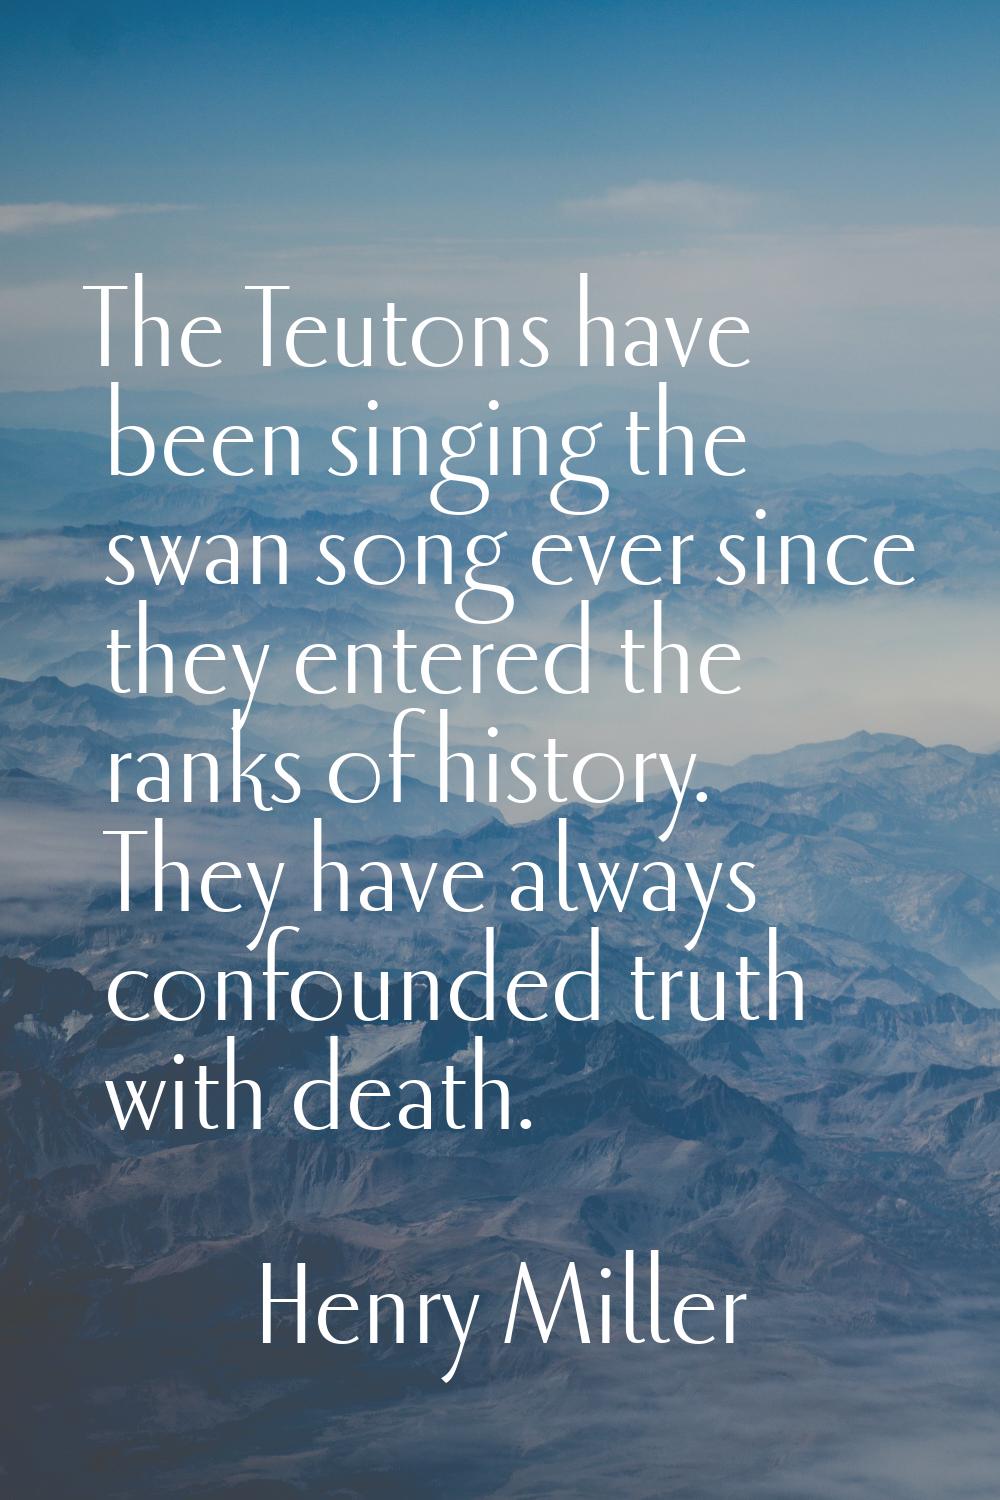 The Teutons have been singing the swan song ever since they entered the ranks of history. They have